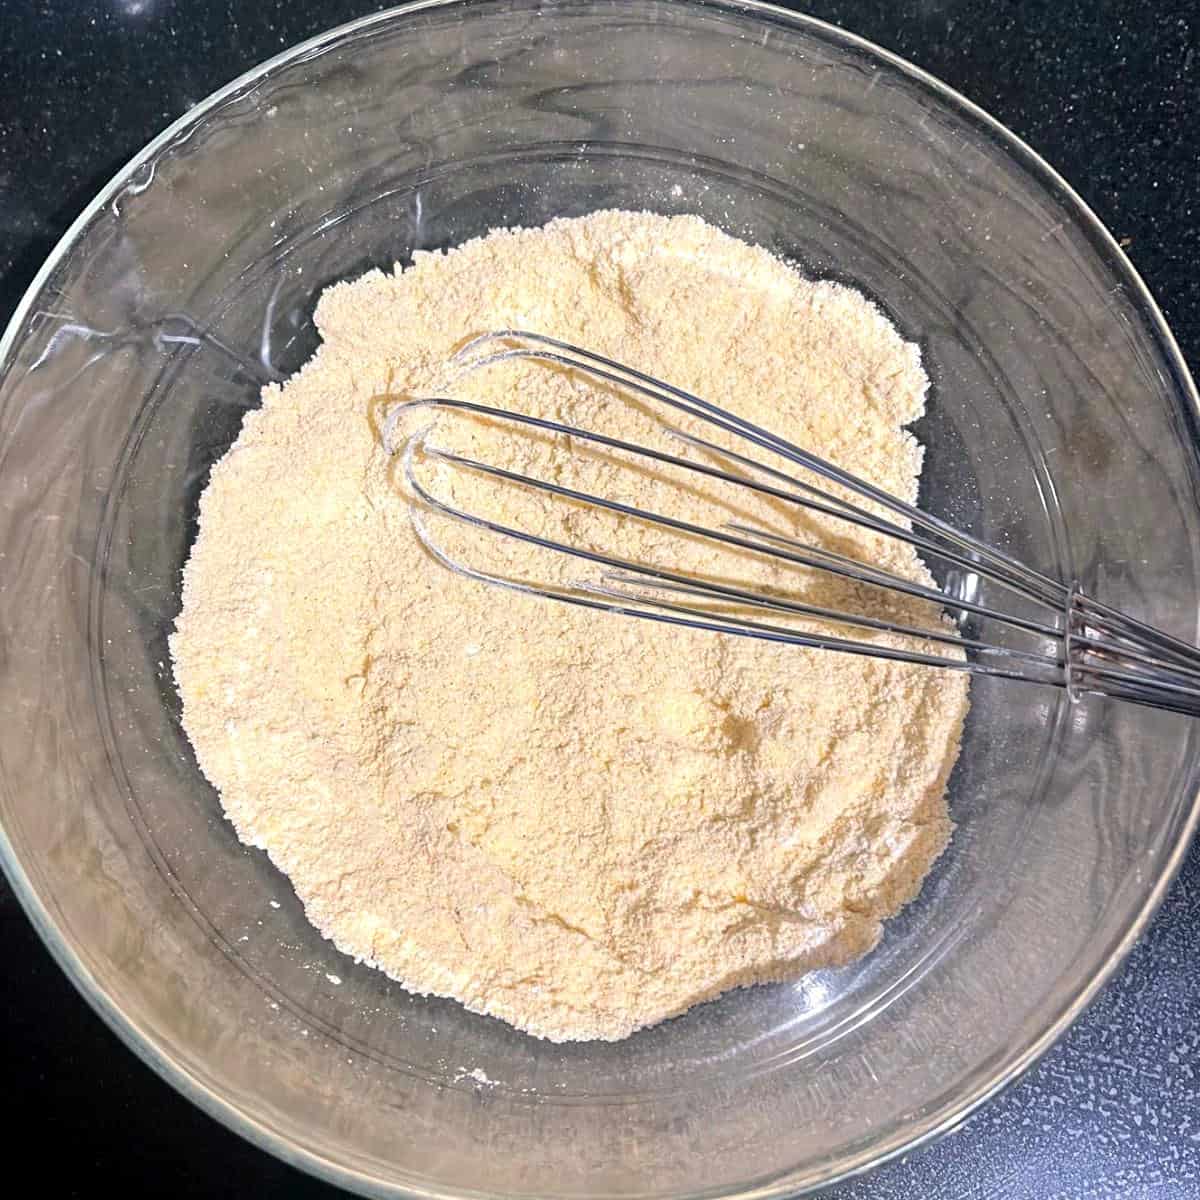 Dry ingredients in glass bowl with whisk.